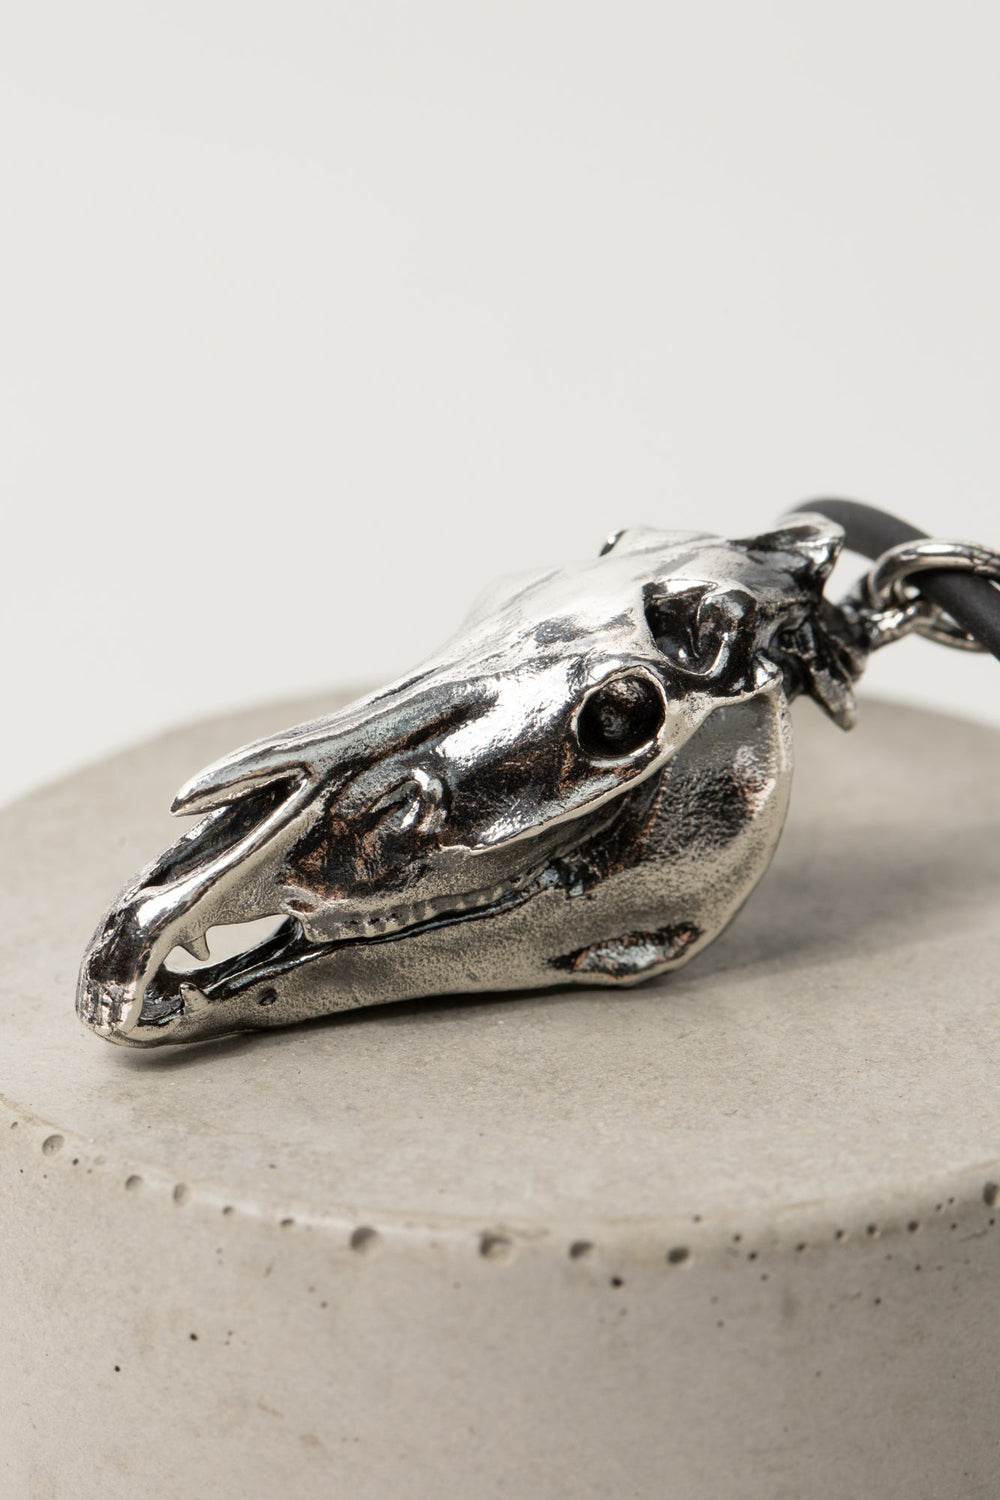 The Horse Skull Pendant on Rope - The Wild Horse Club